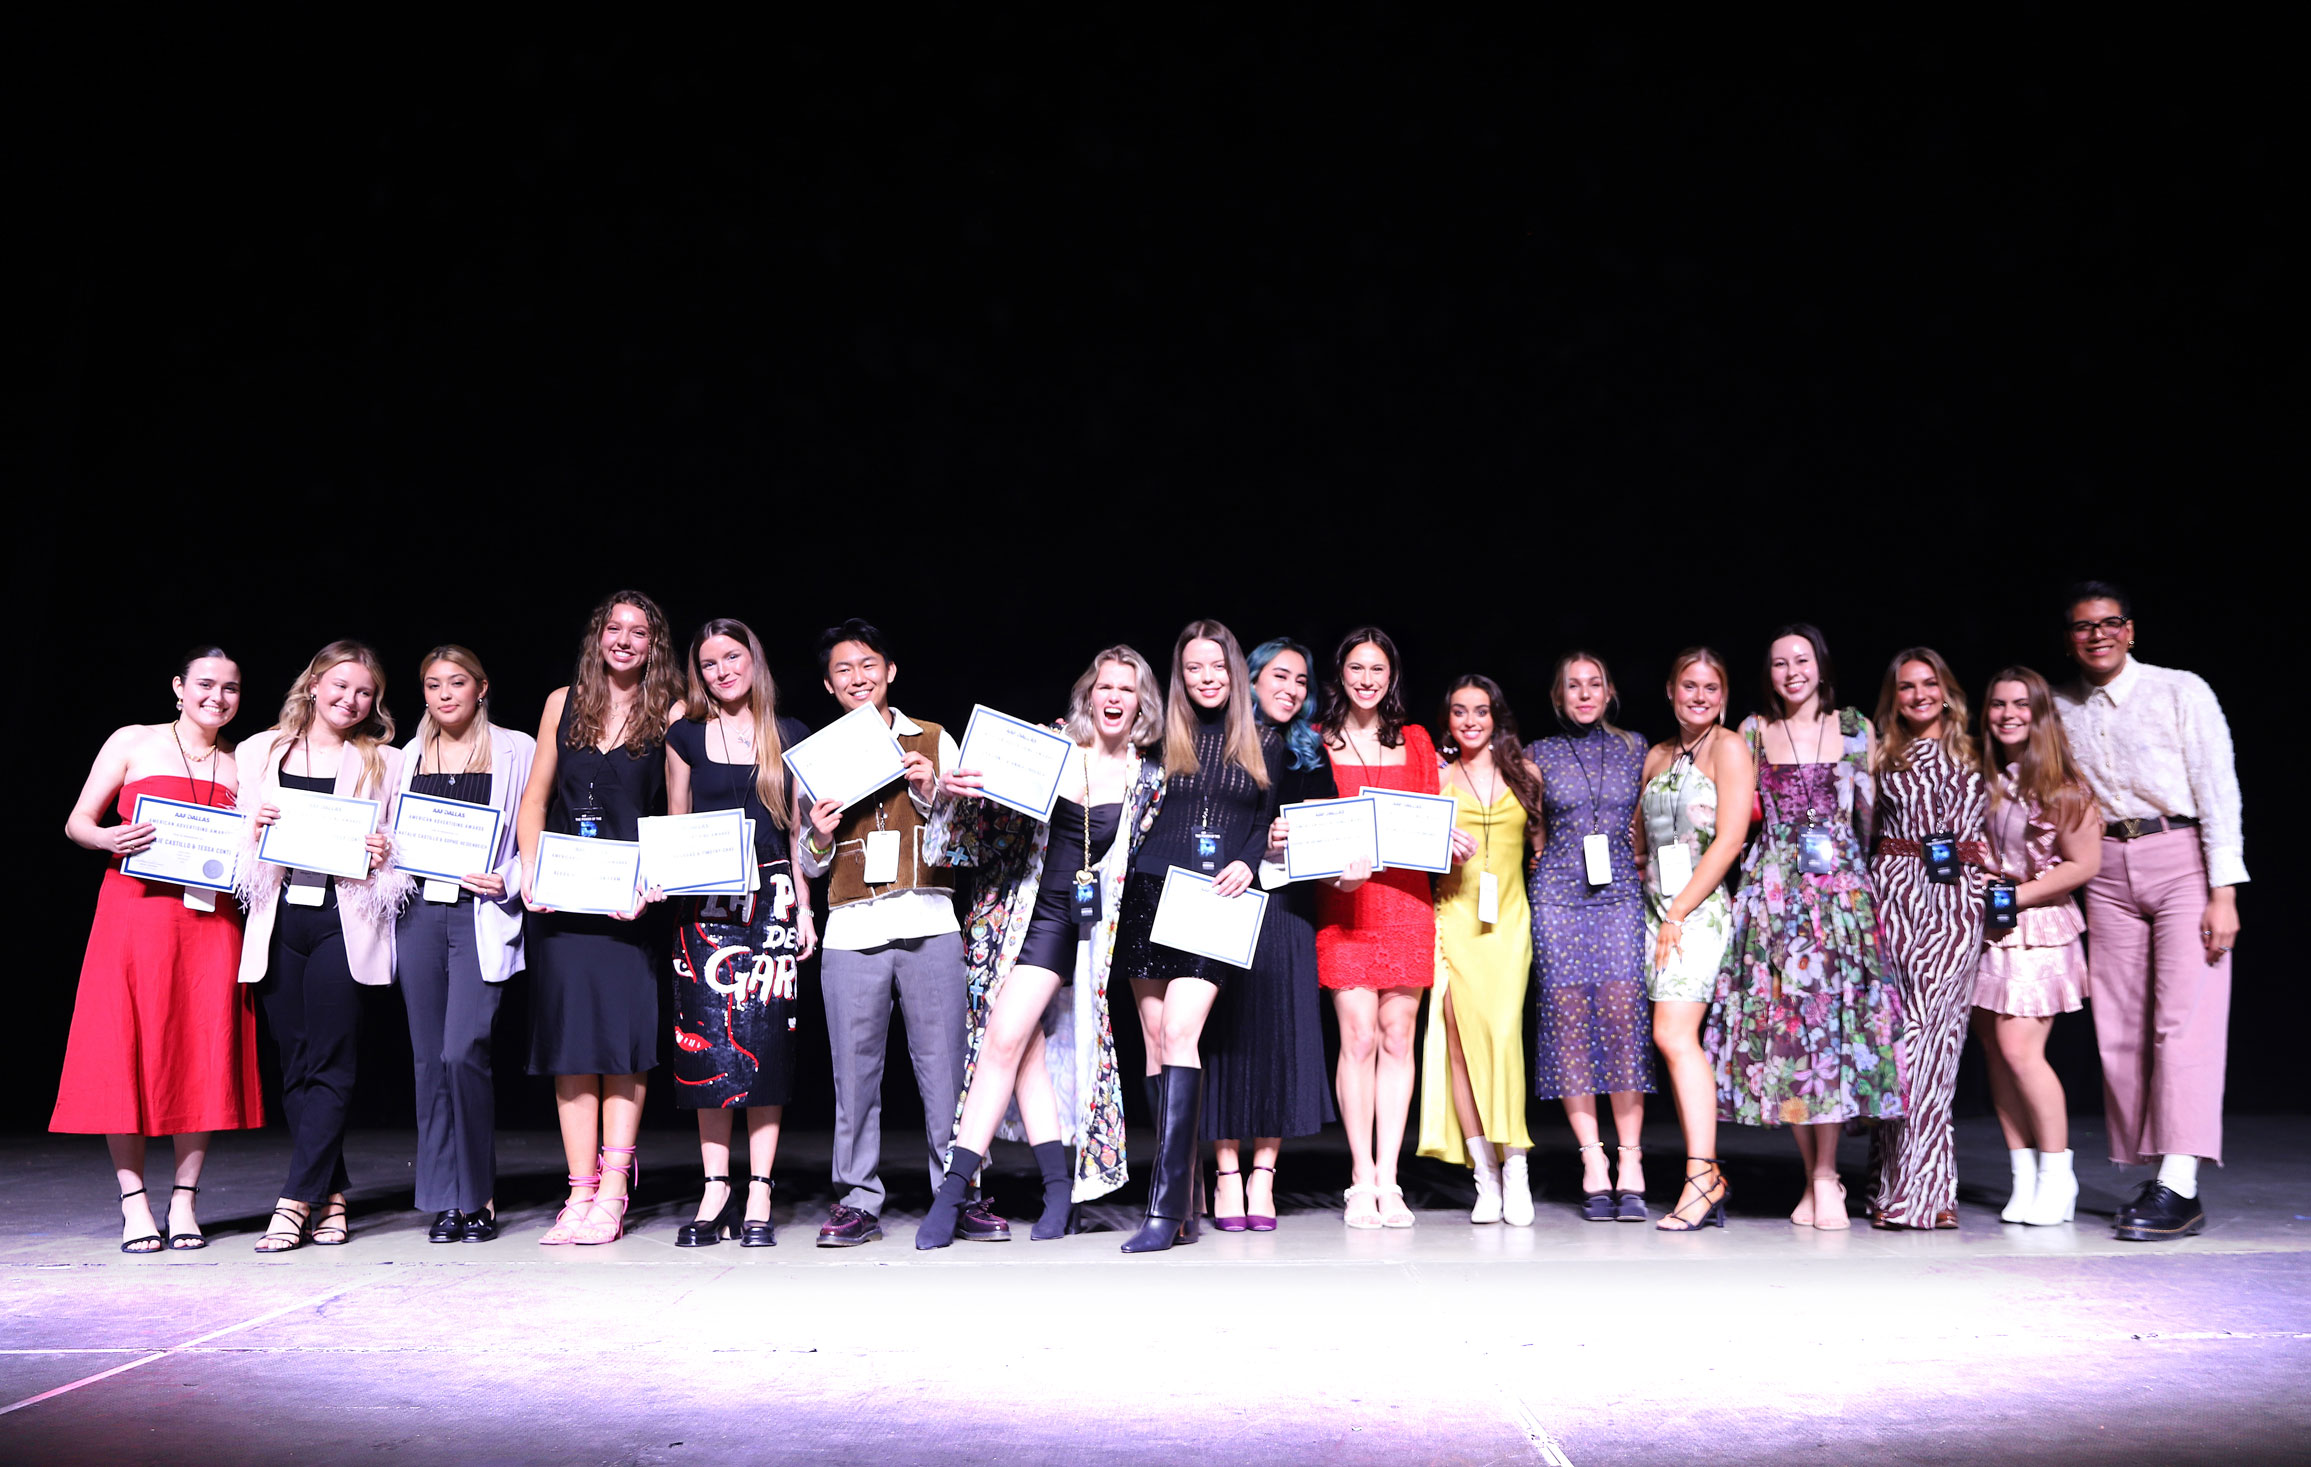 The Dallas ADDY Awards recognizes 26 advertising students for their work.